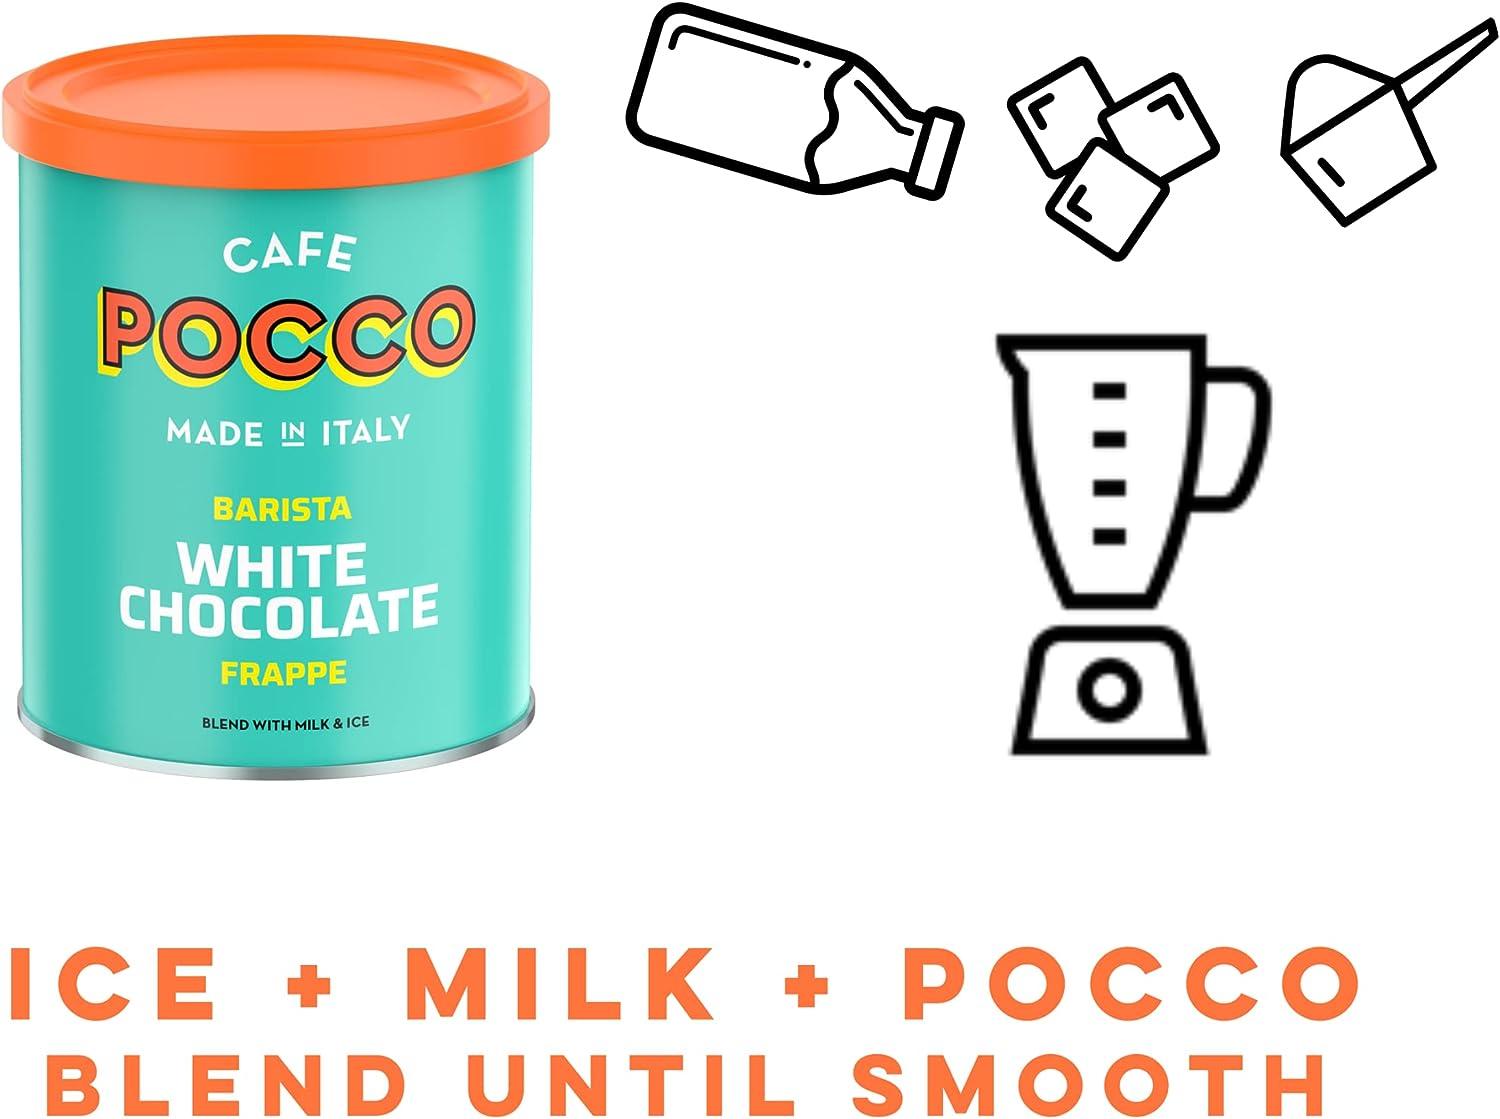 Cafe Pocco - White Chocolate Frappe Mix - 500g - Vending Superstore